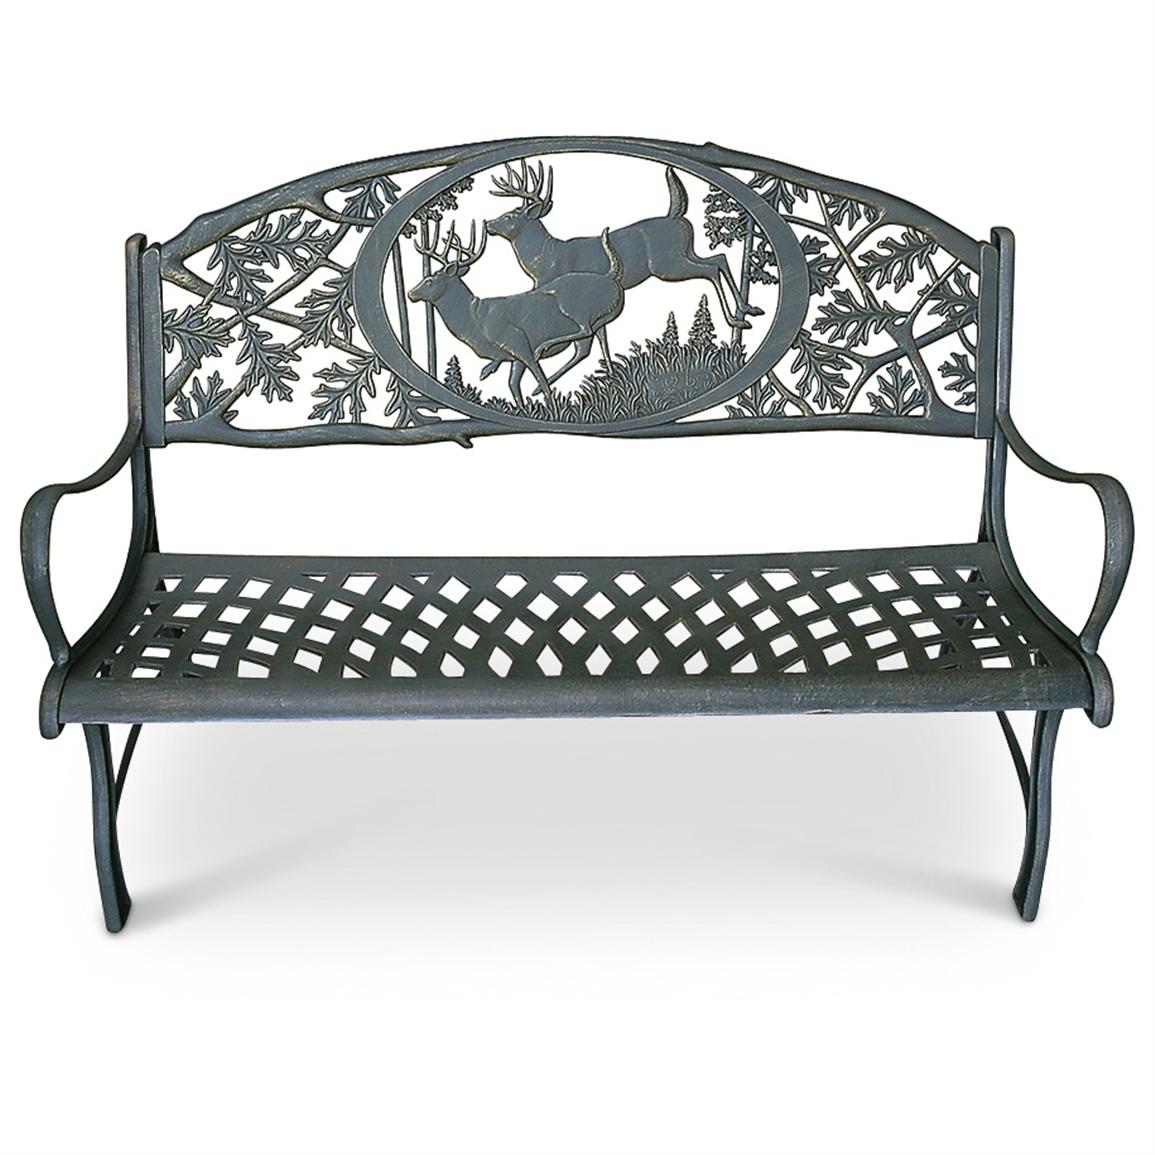 Cast Iron Outdoor Bench - 169588, Patio Furniture at Sportsman's Guide